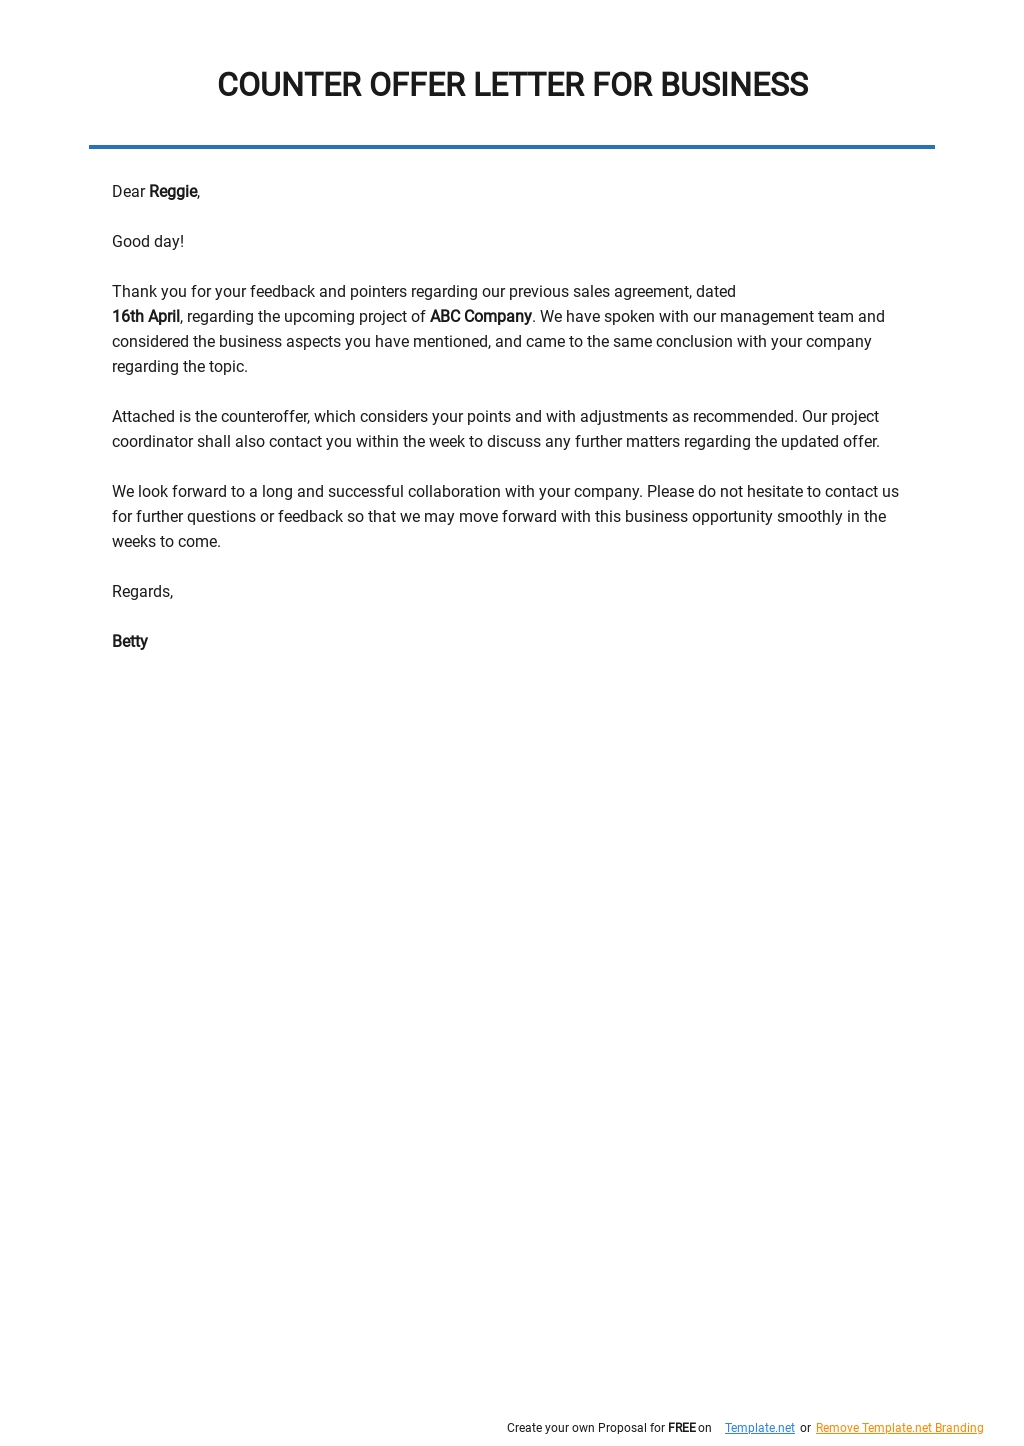 Counter Offer Letter for Business Template.jpe